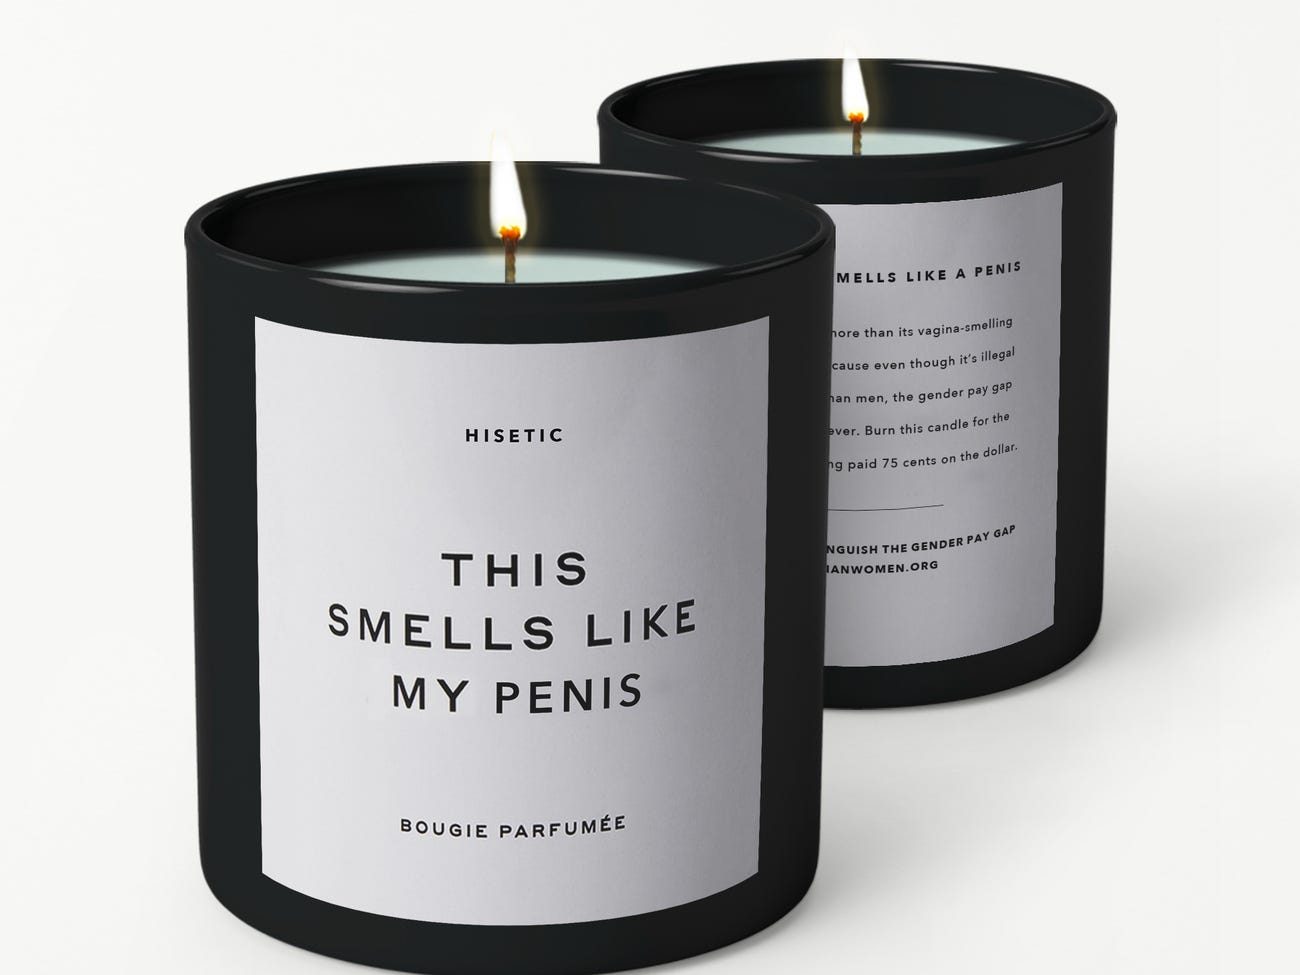 Penis-scented candle was made in response to Goop’s vagina candle | Insider